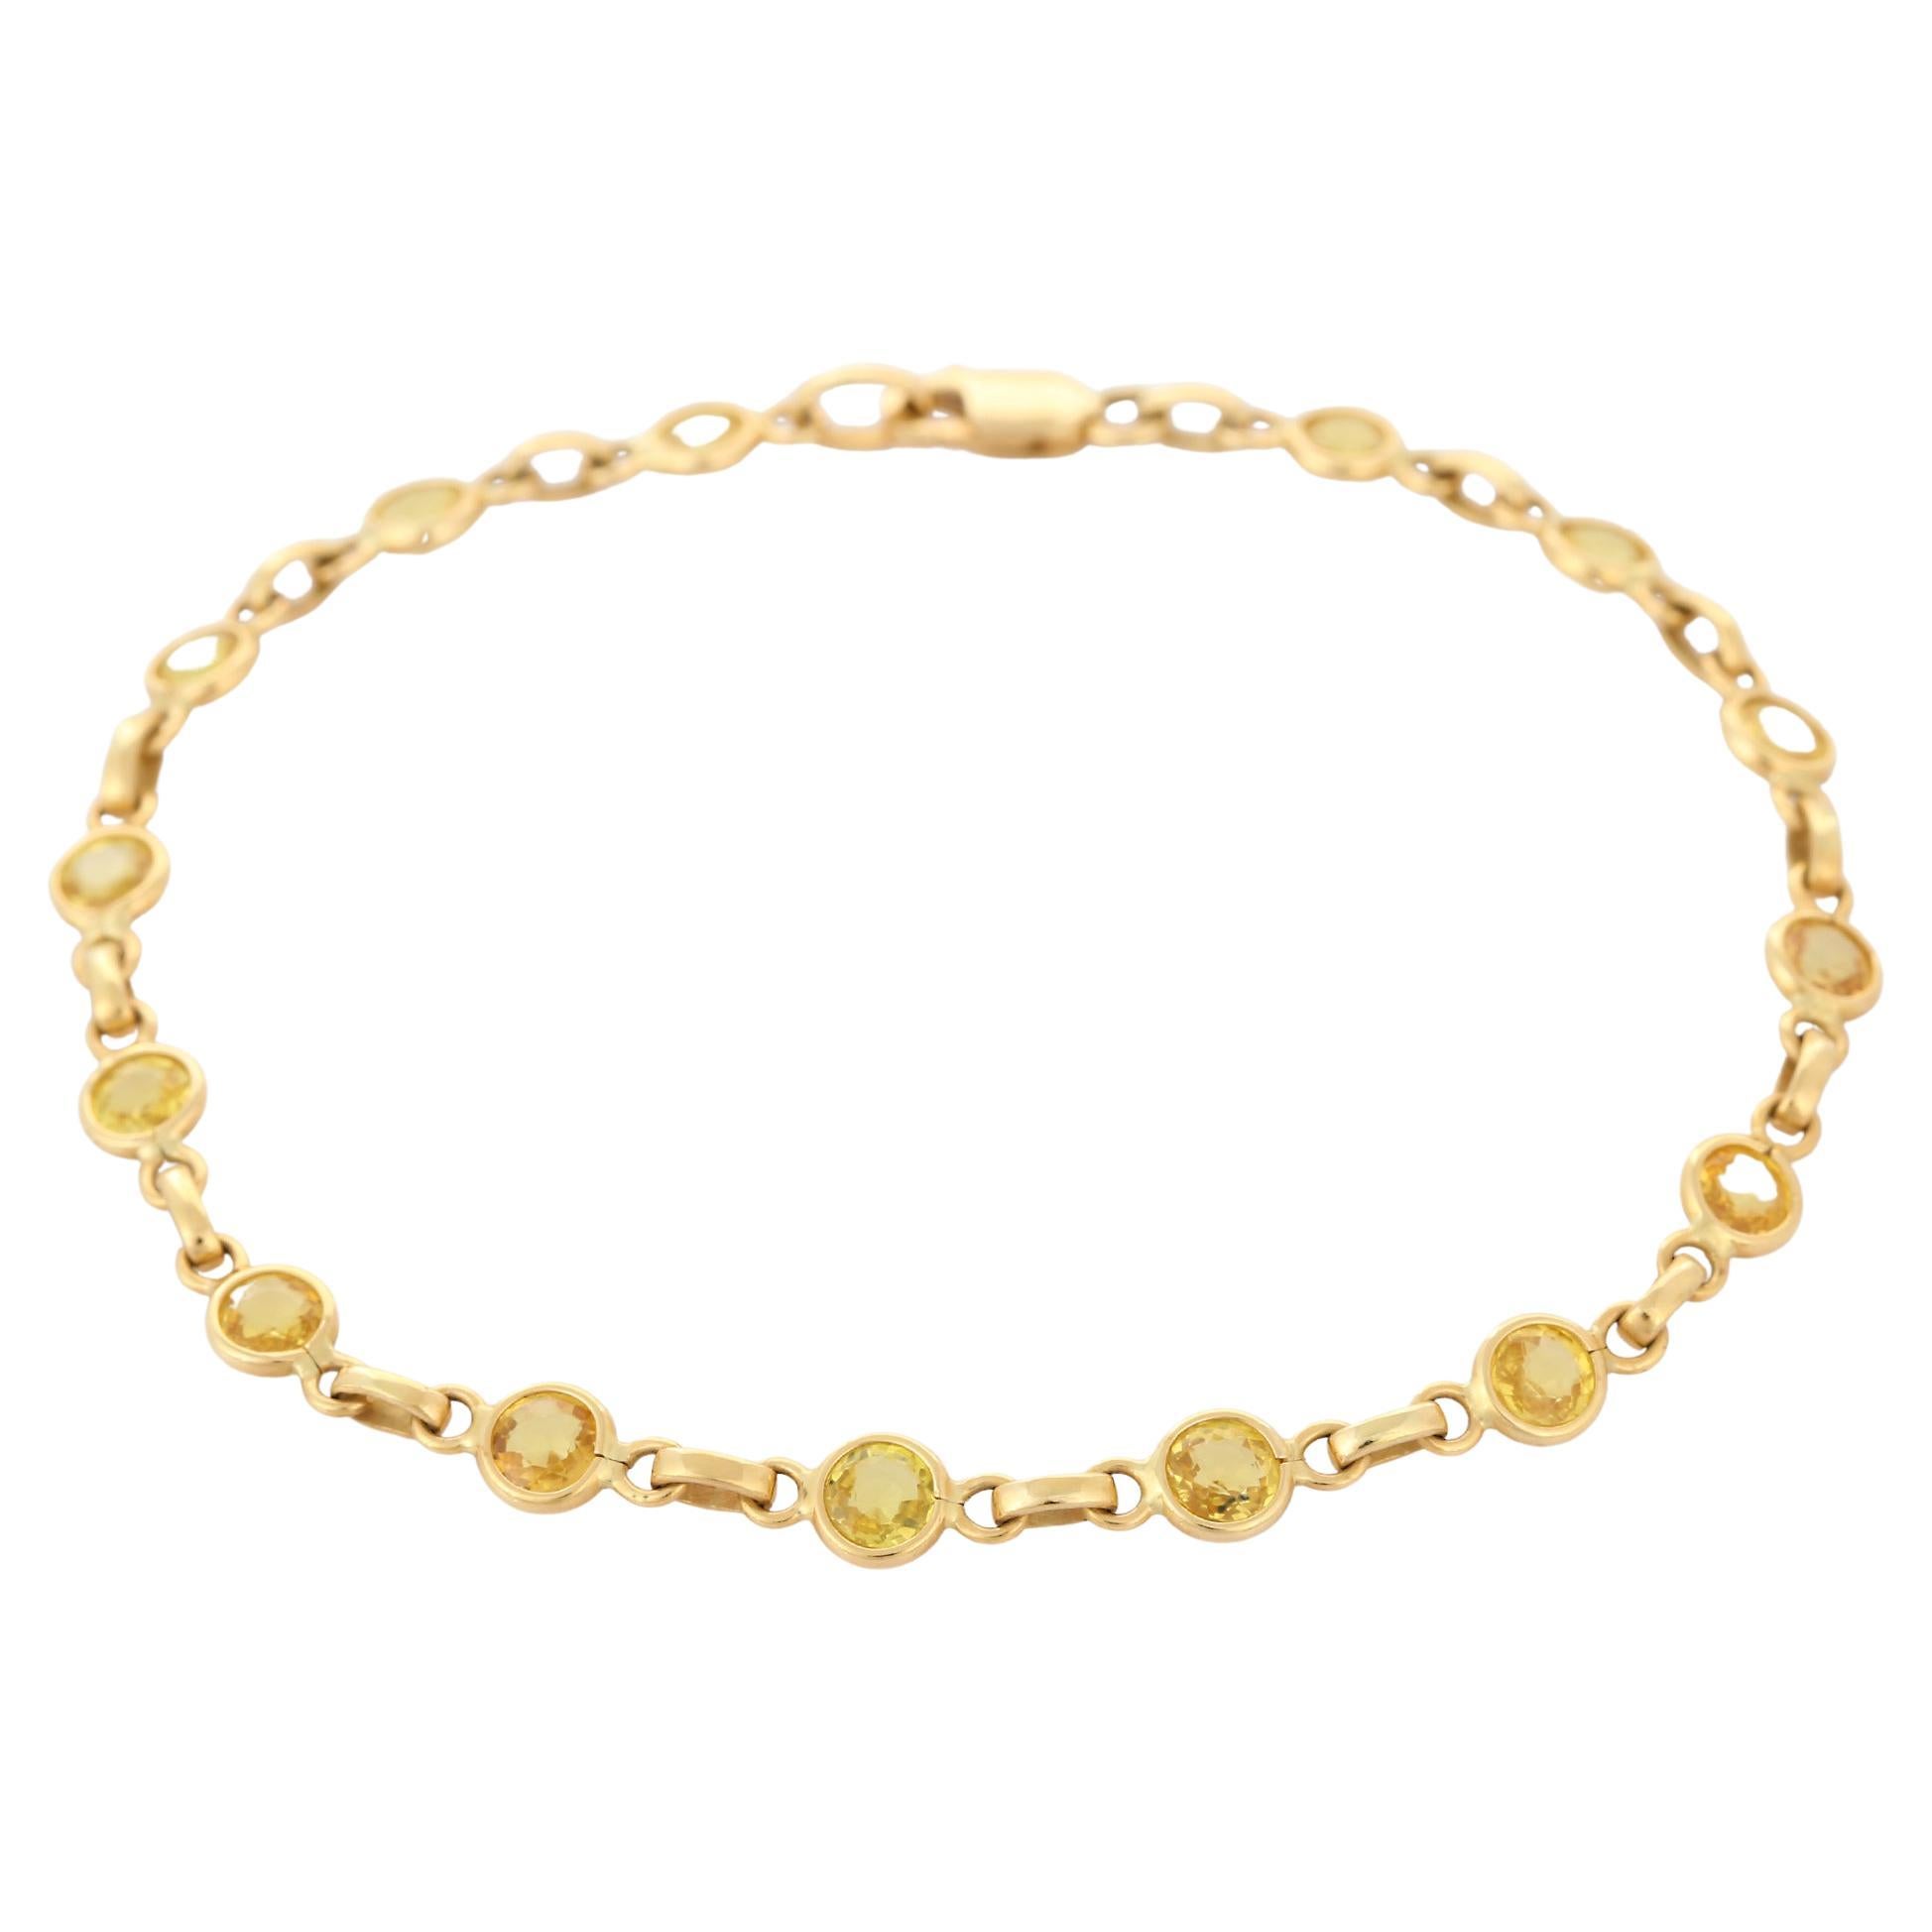 Alluring 4.14 Ct Round Cut Yellow Sapphire Chain Bracelet in 18K Yellow Gold For Sale